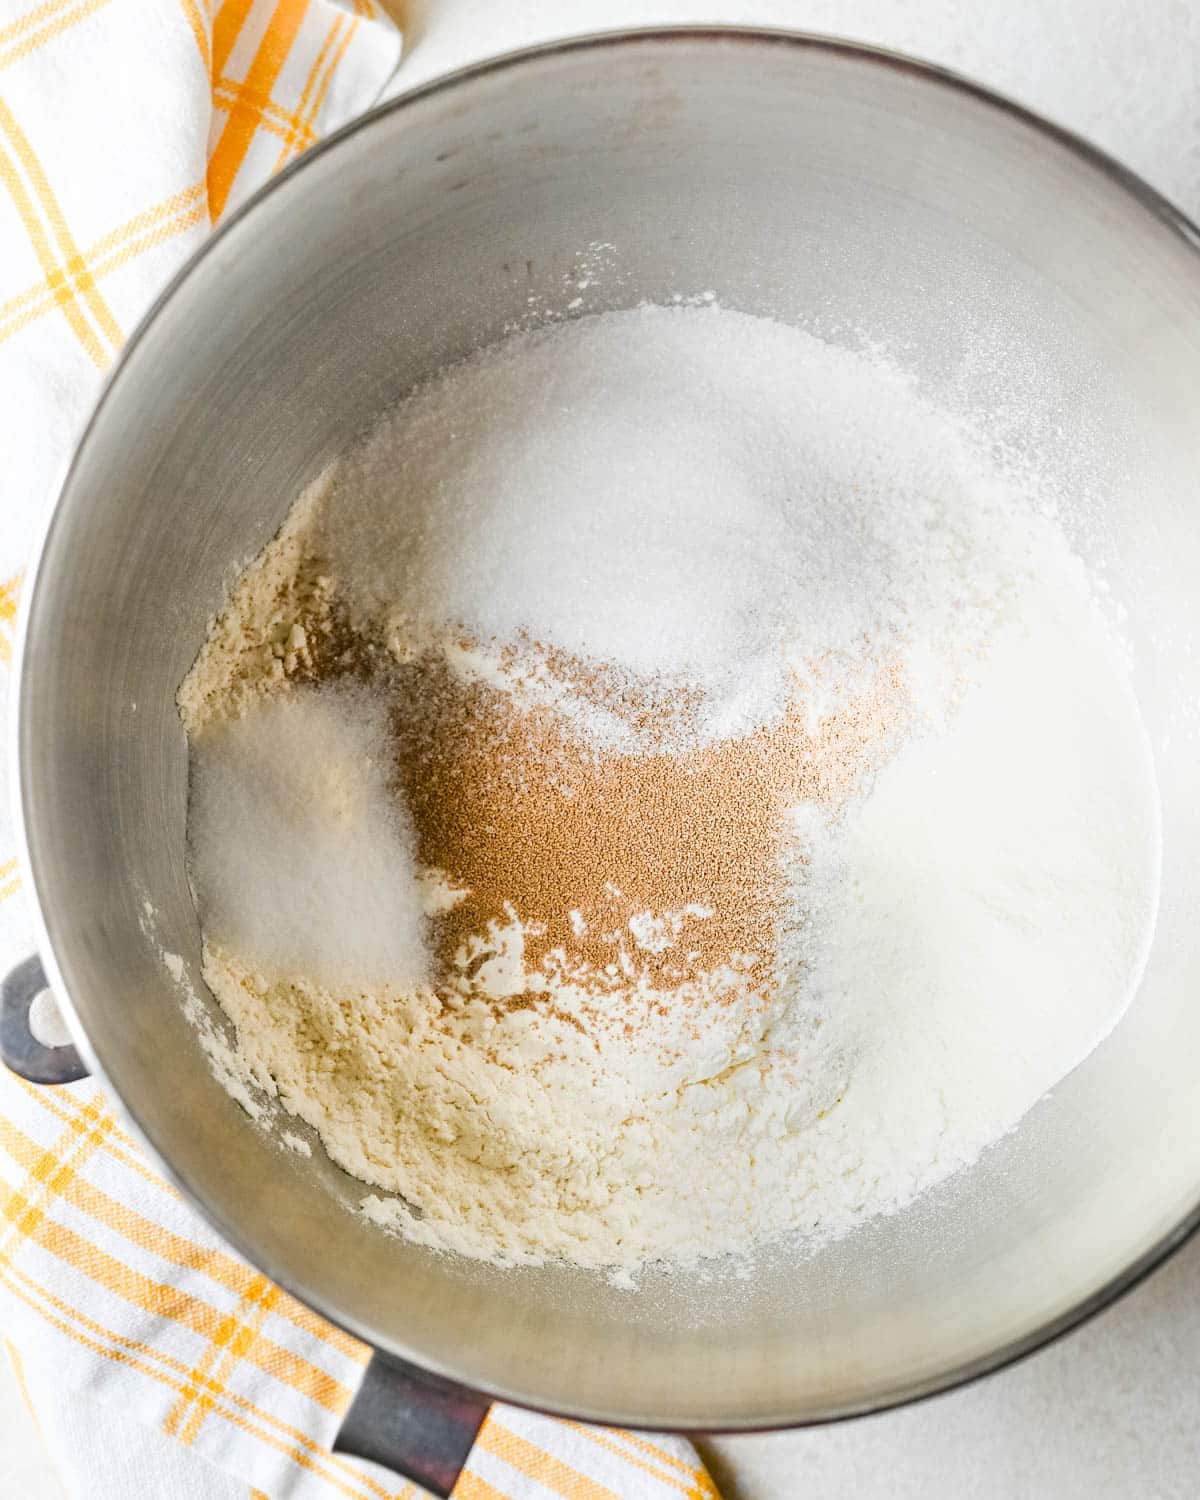 Mixing the dry ingredients for the cinnamon roll dough.